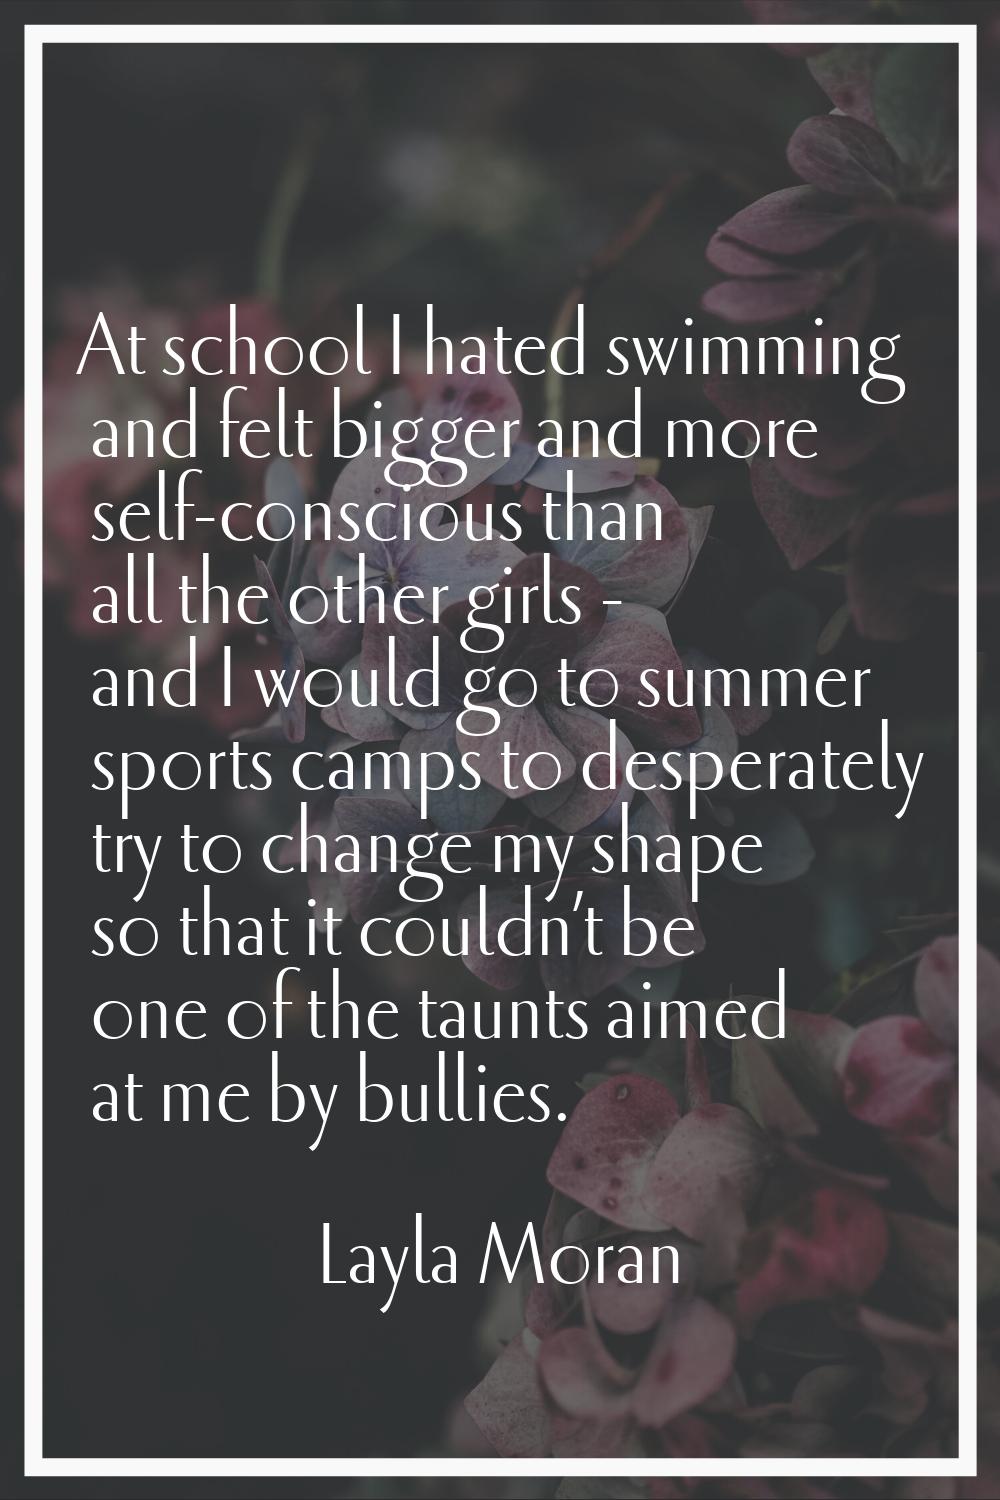 At school I hated swimming and felt bigger and more self-conscious than all the other girls - and I